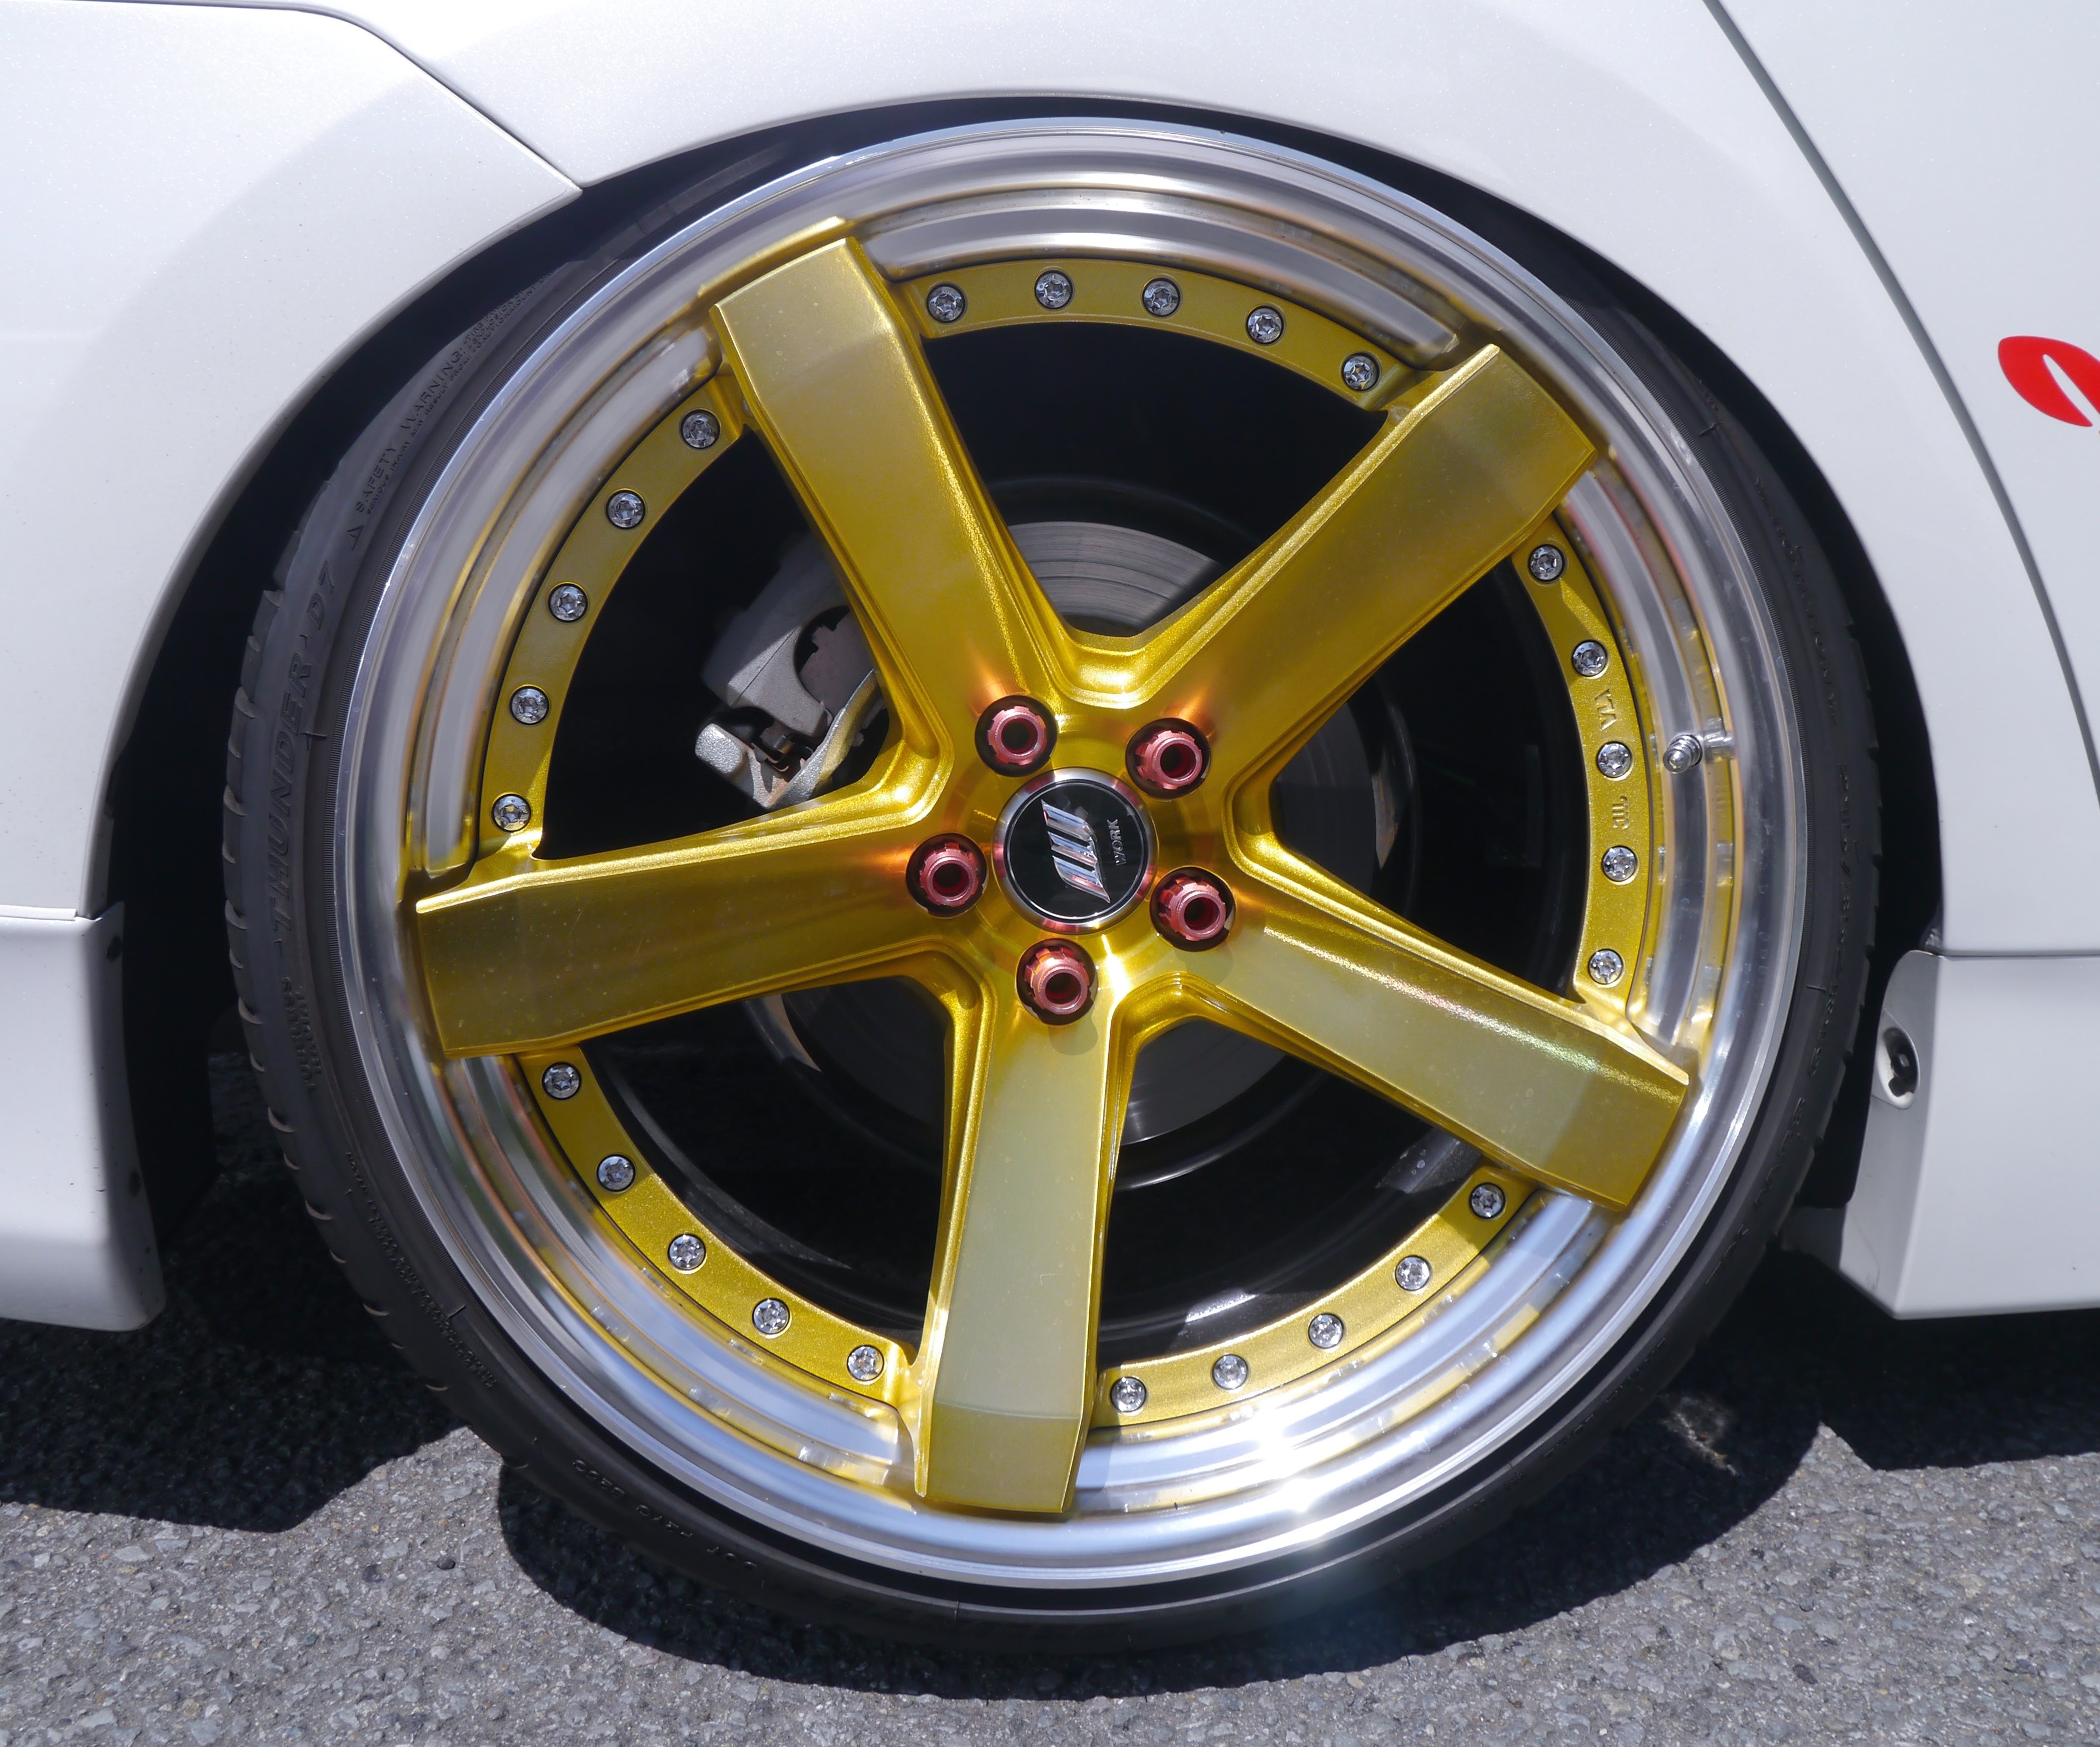 gold and silver 5-spoked automotive rims